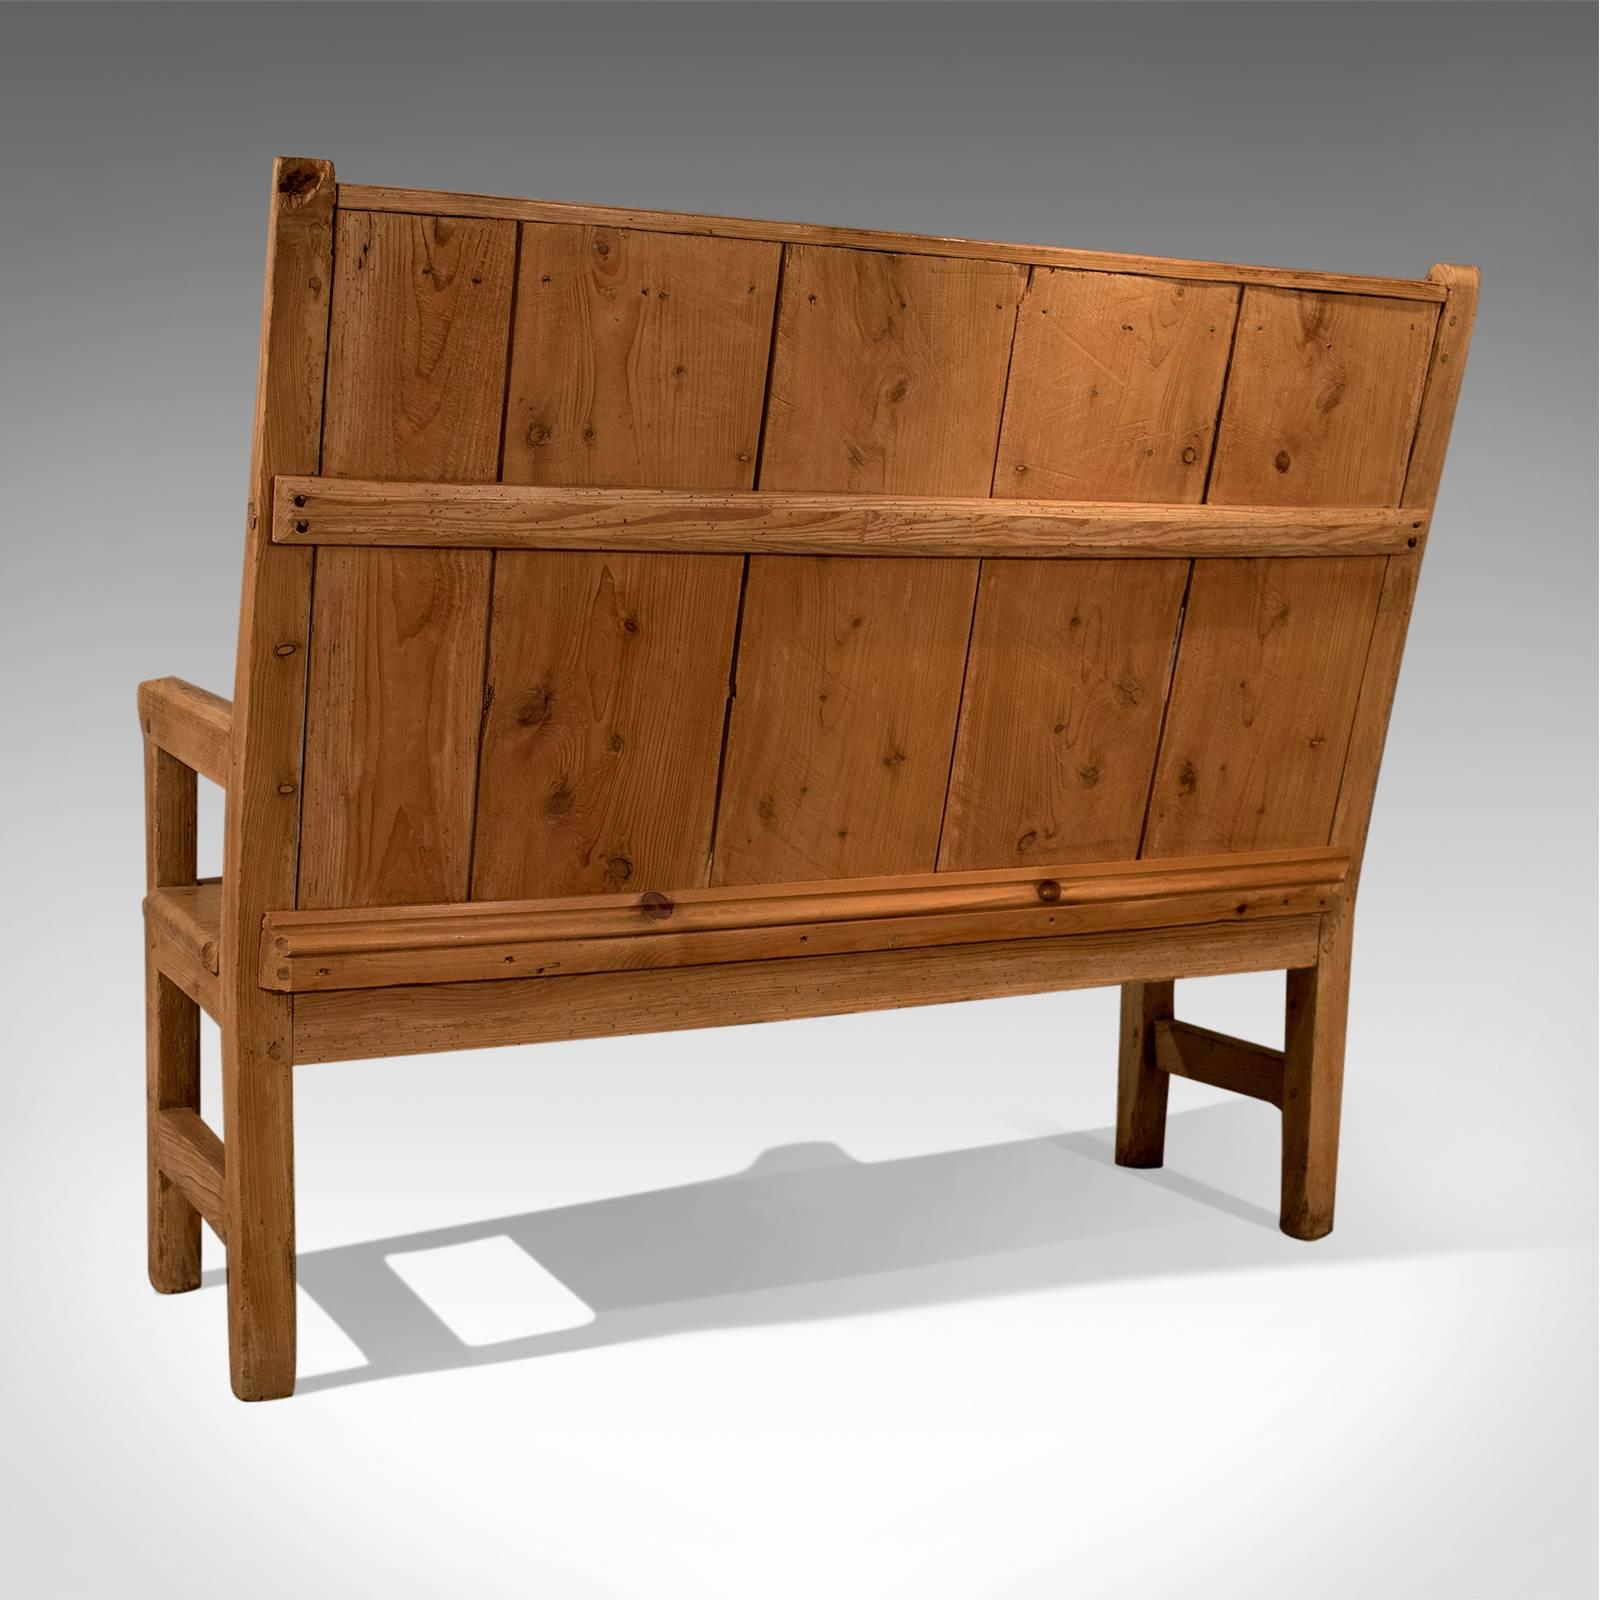 Late 19th Century Antique Victorian Pine Settle Hall Bench Tavern Country Pew, circa 1880